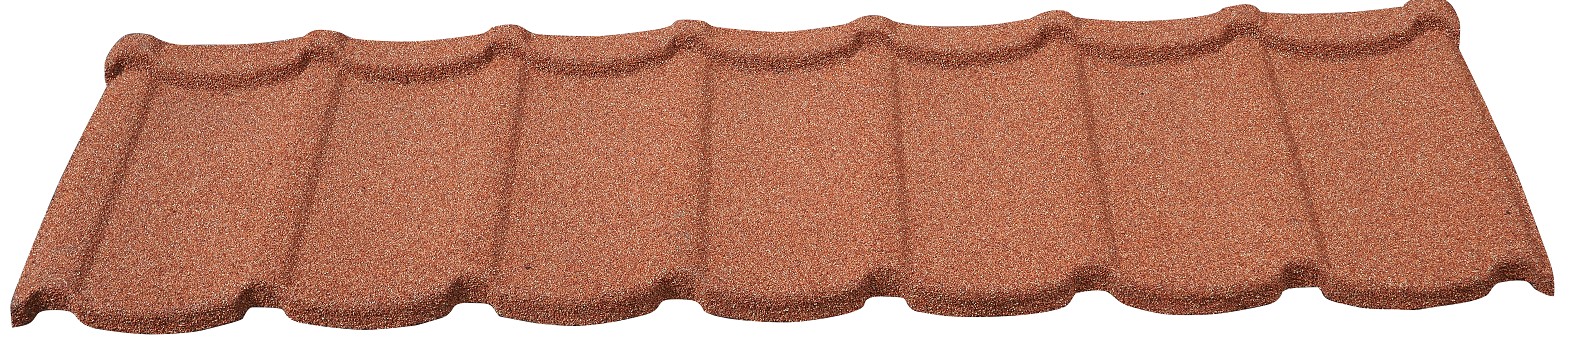 New Sunlight Roof top wood shake roof tiles supply for School-9